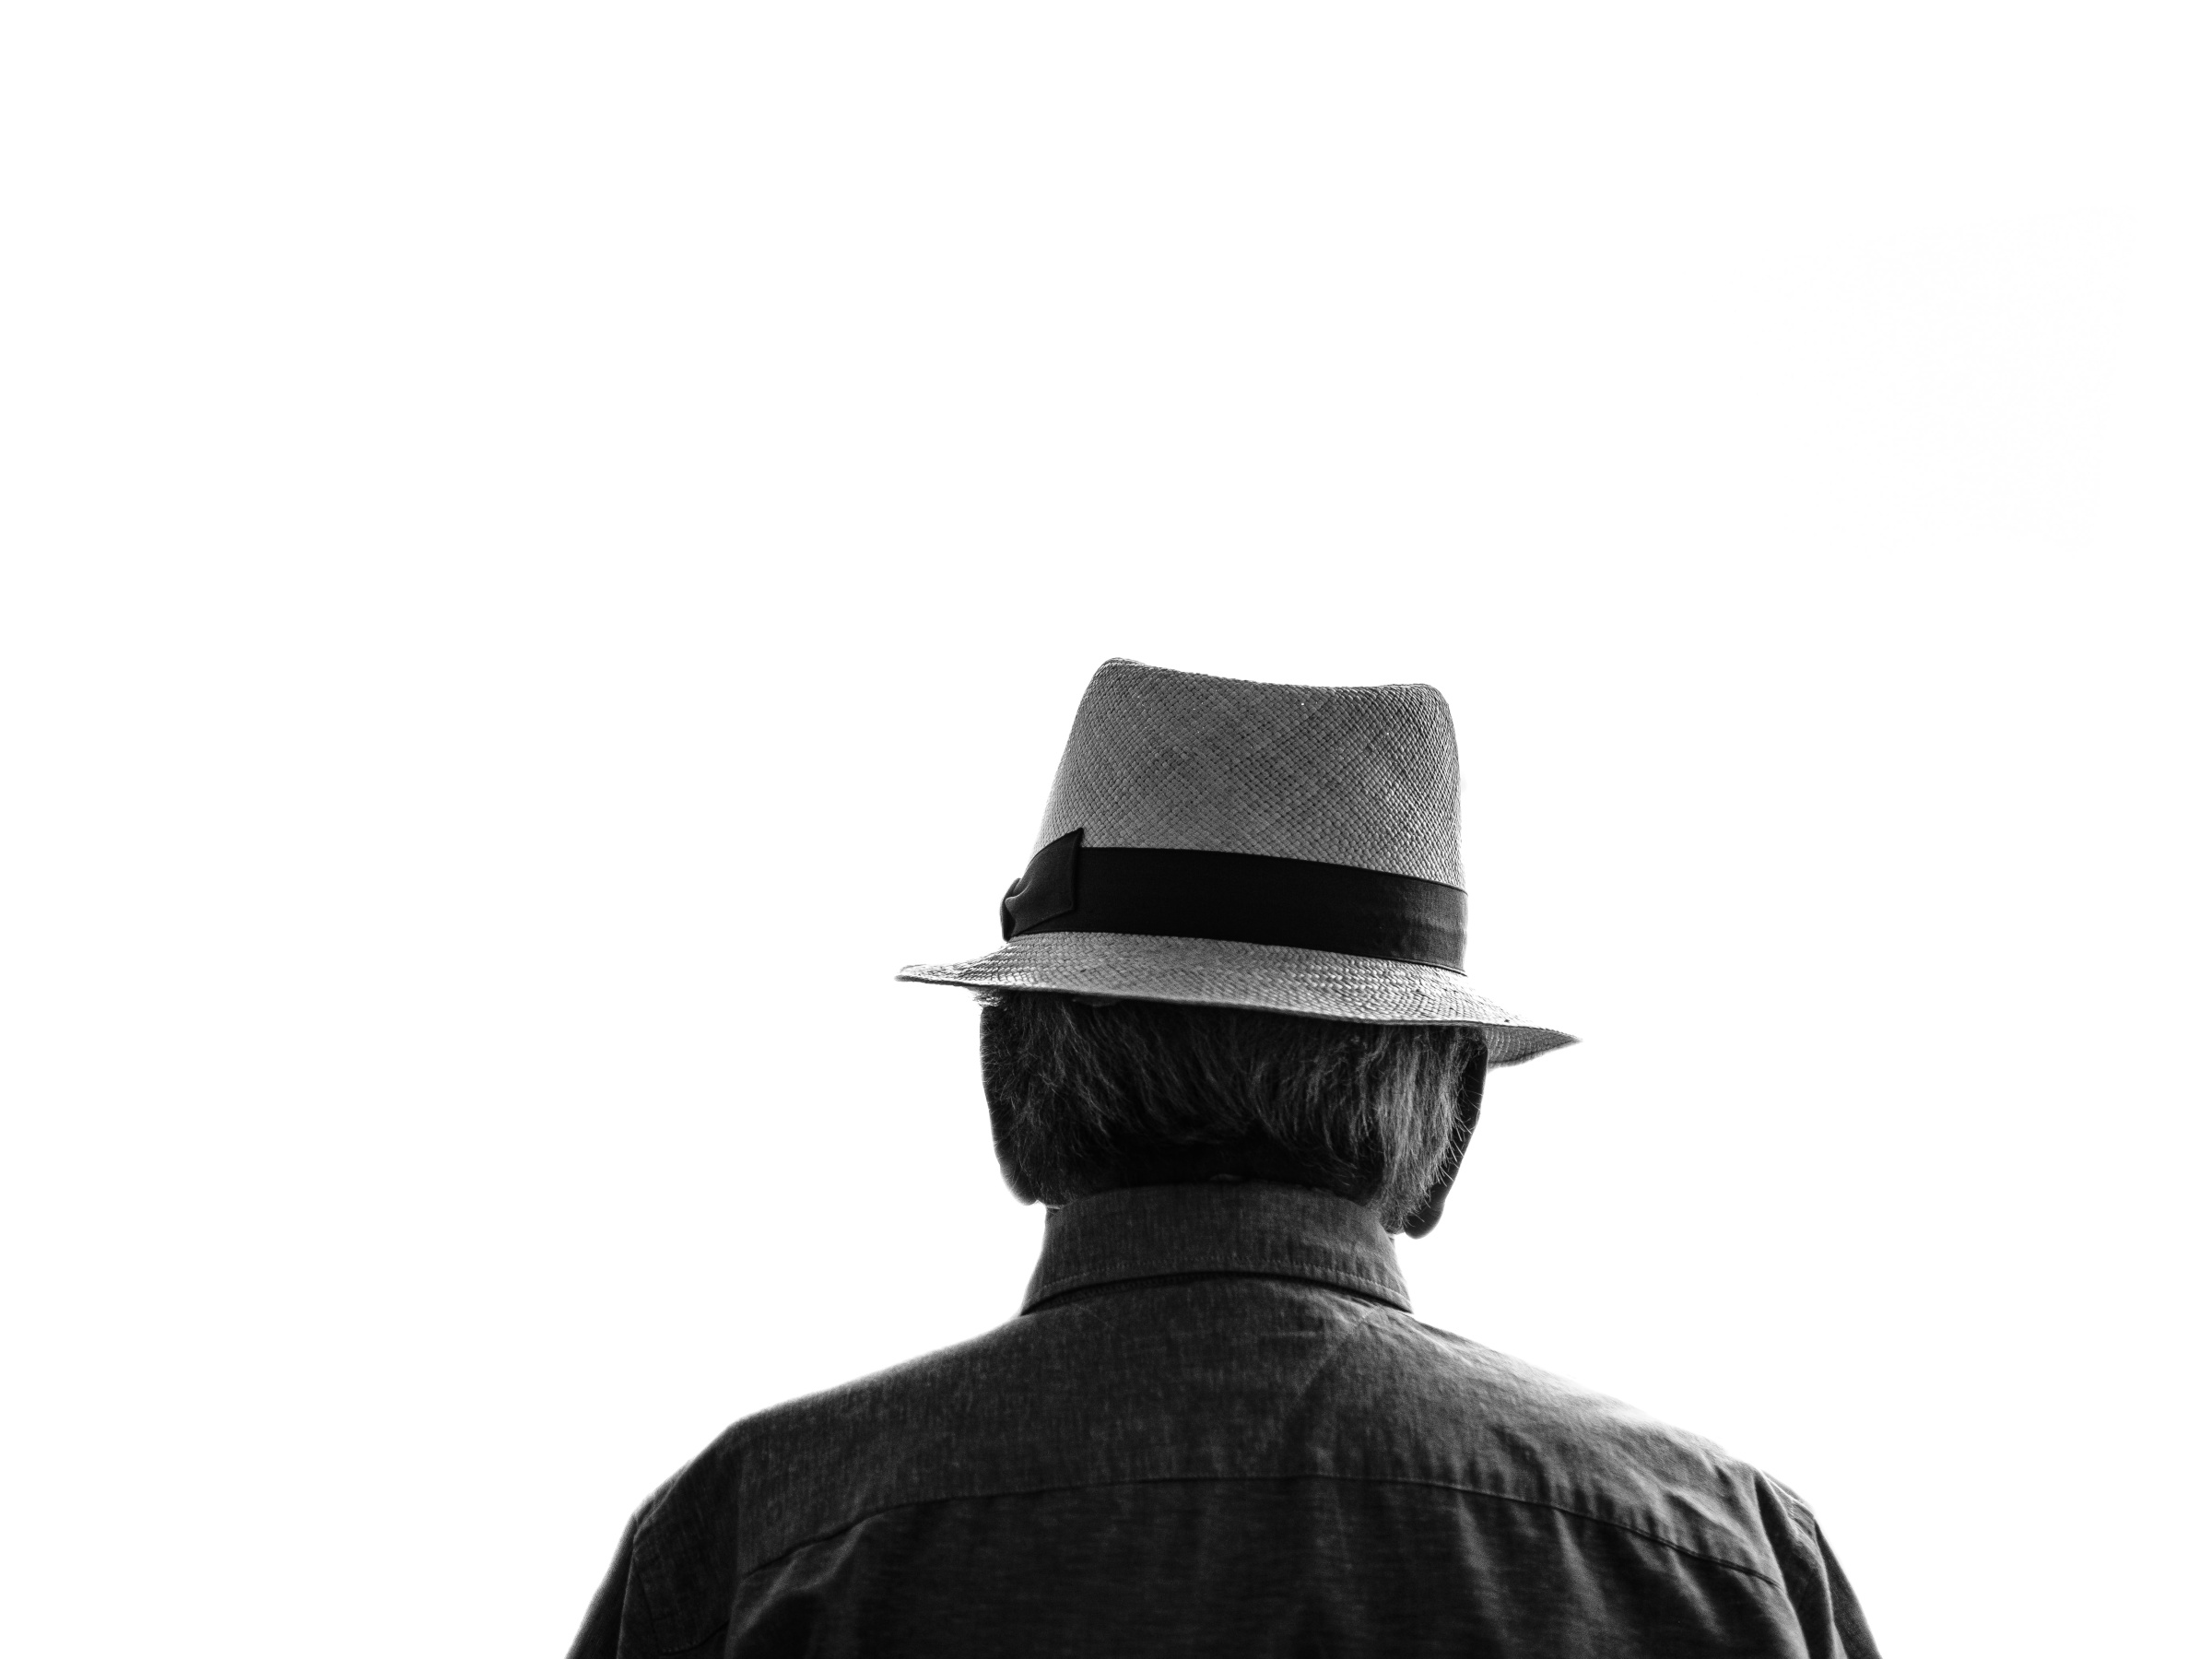 An old man wearing a hat photographed from behind